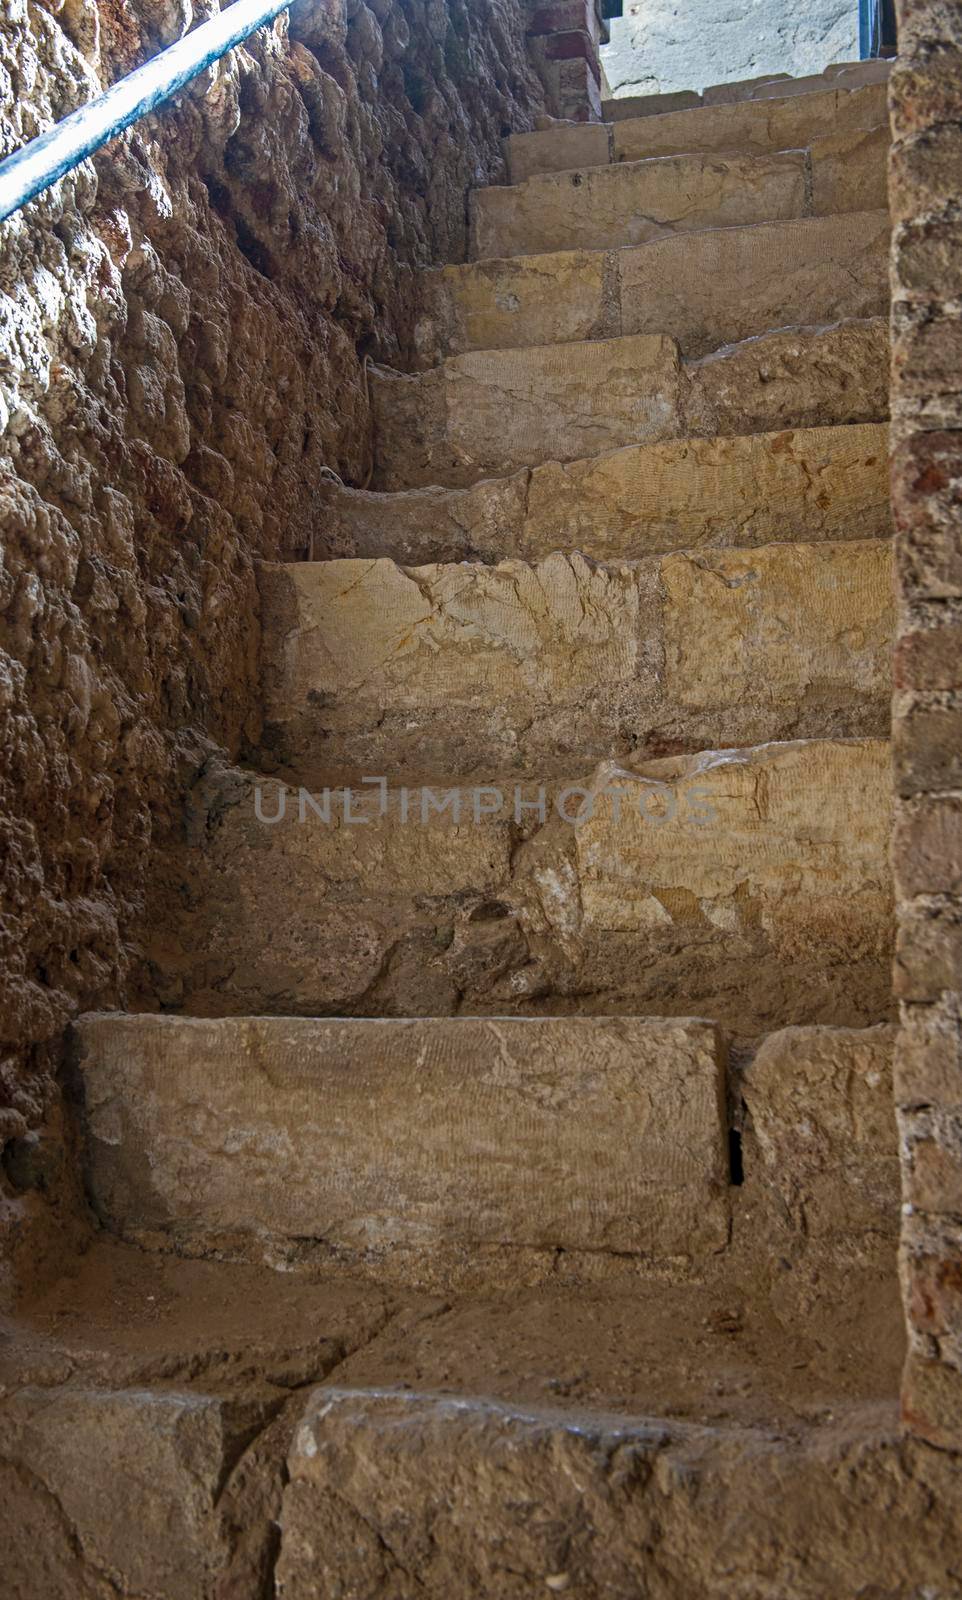 Ancient old stone stairway entrance in ottoman period fort with ray of sunlight at El Quseir Egypt